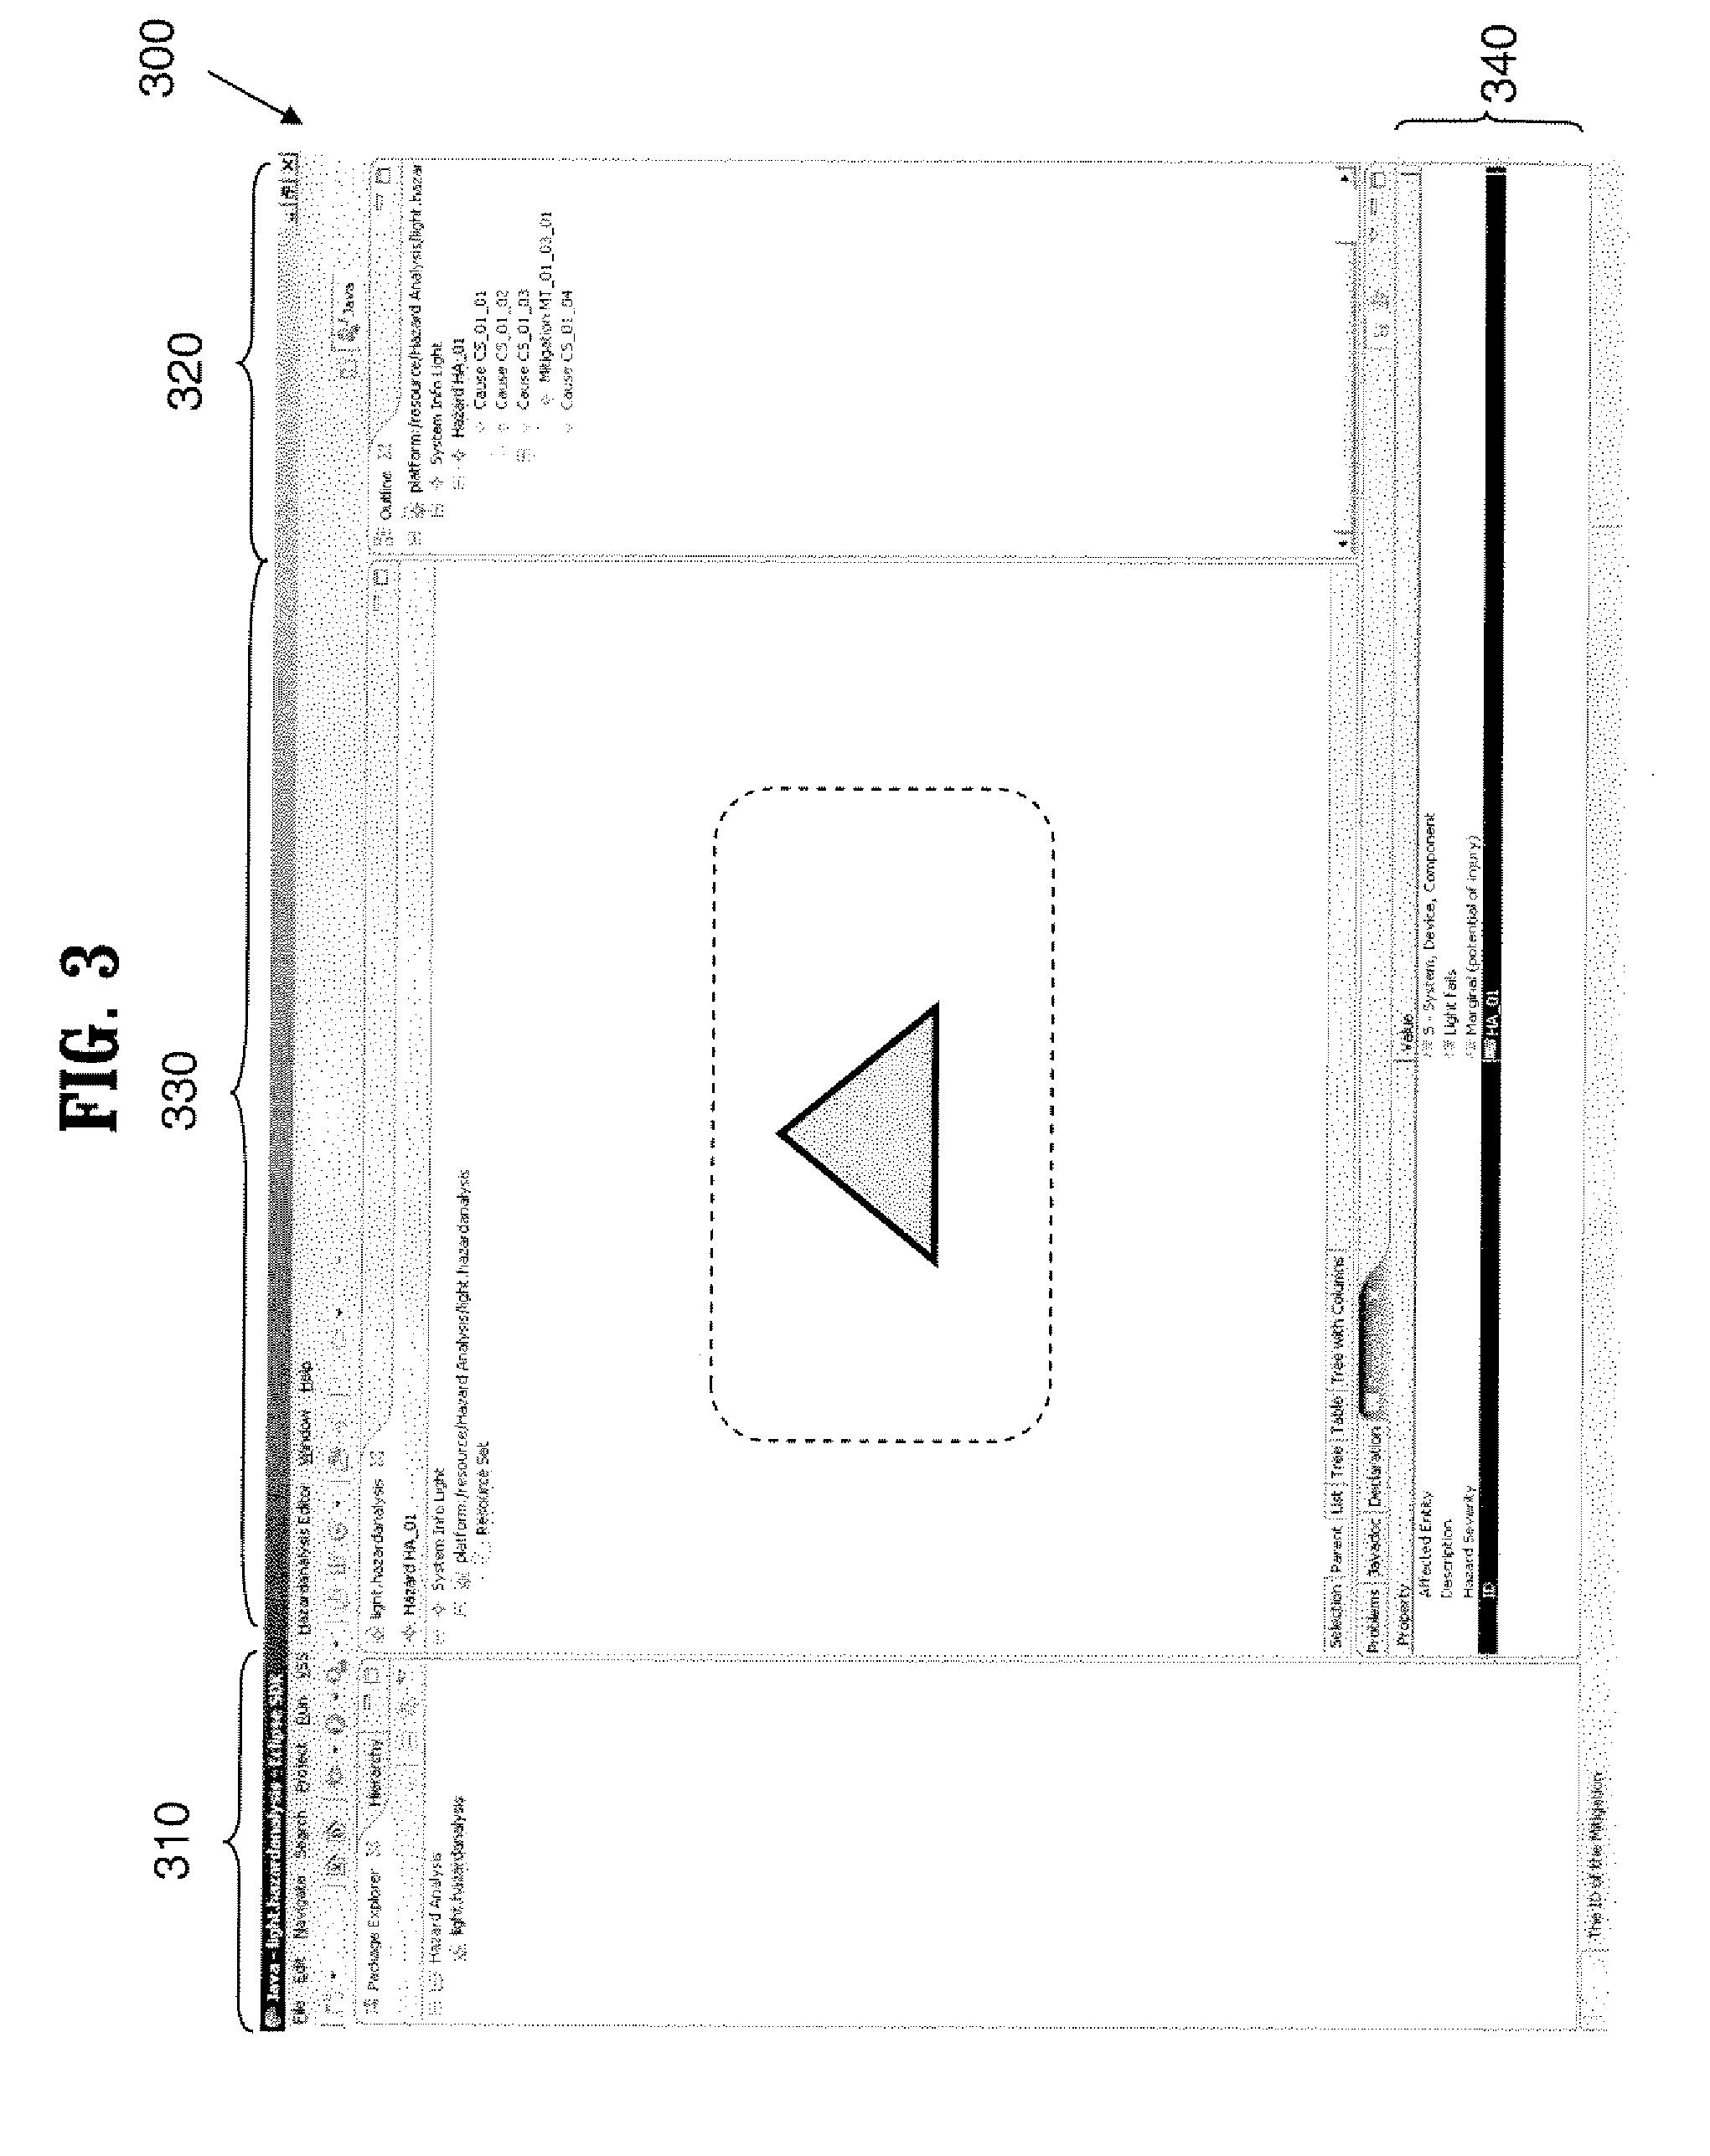 Systems and Methods For Hazards Analysis